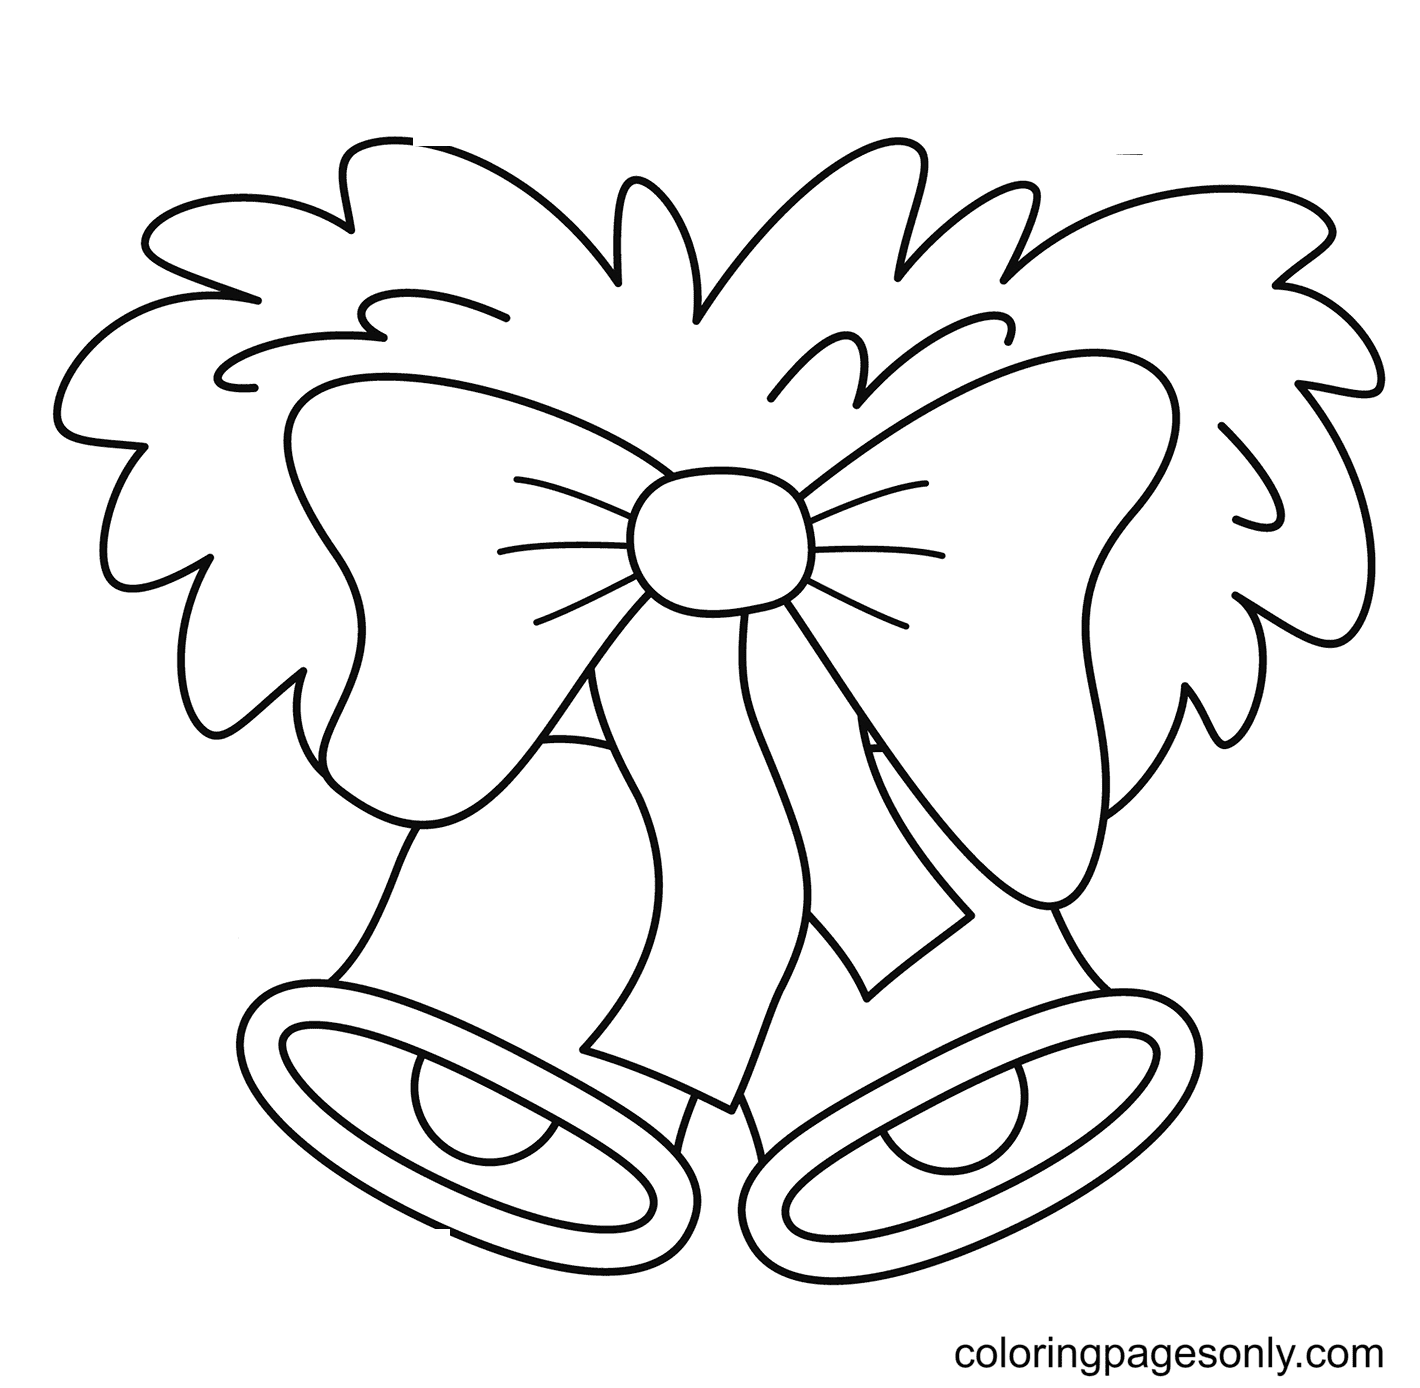 Lovely Christmas Bells Coloring Pages